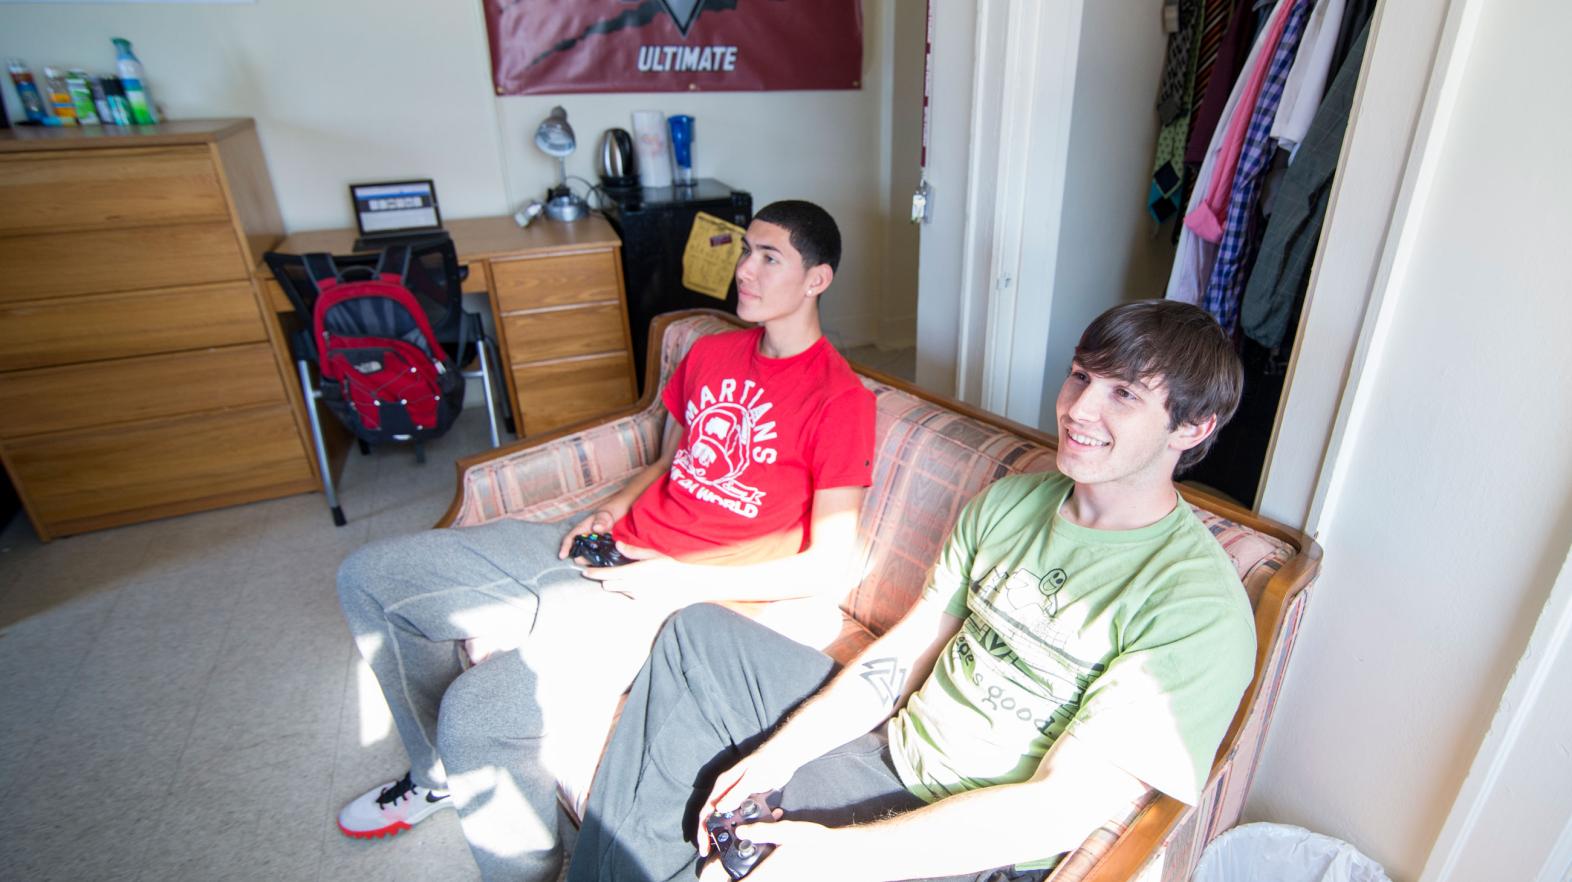 Two students play video games in their Alumni Hall dorm room.